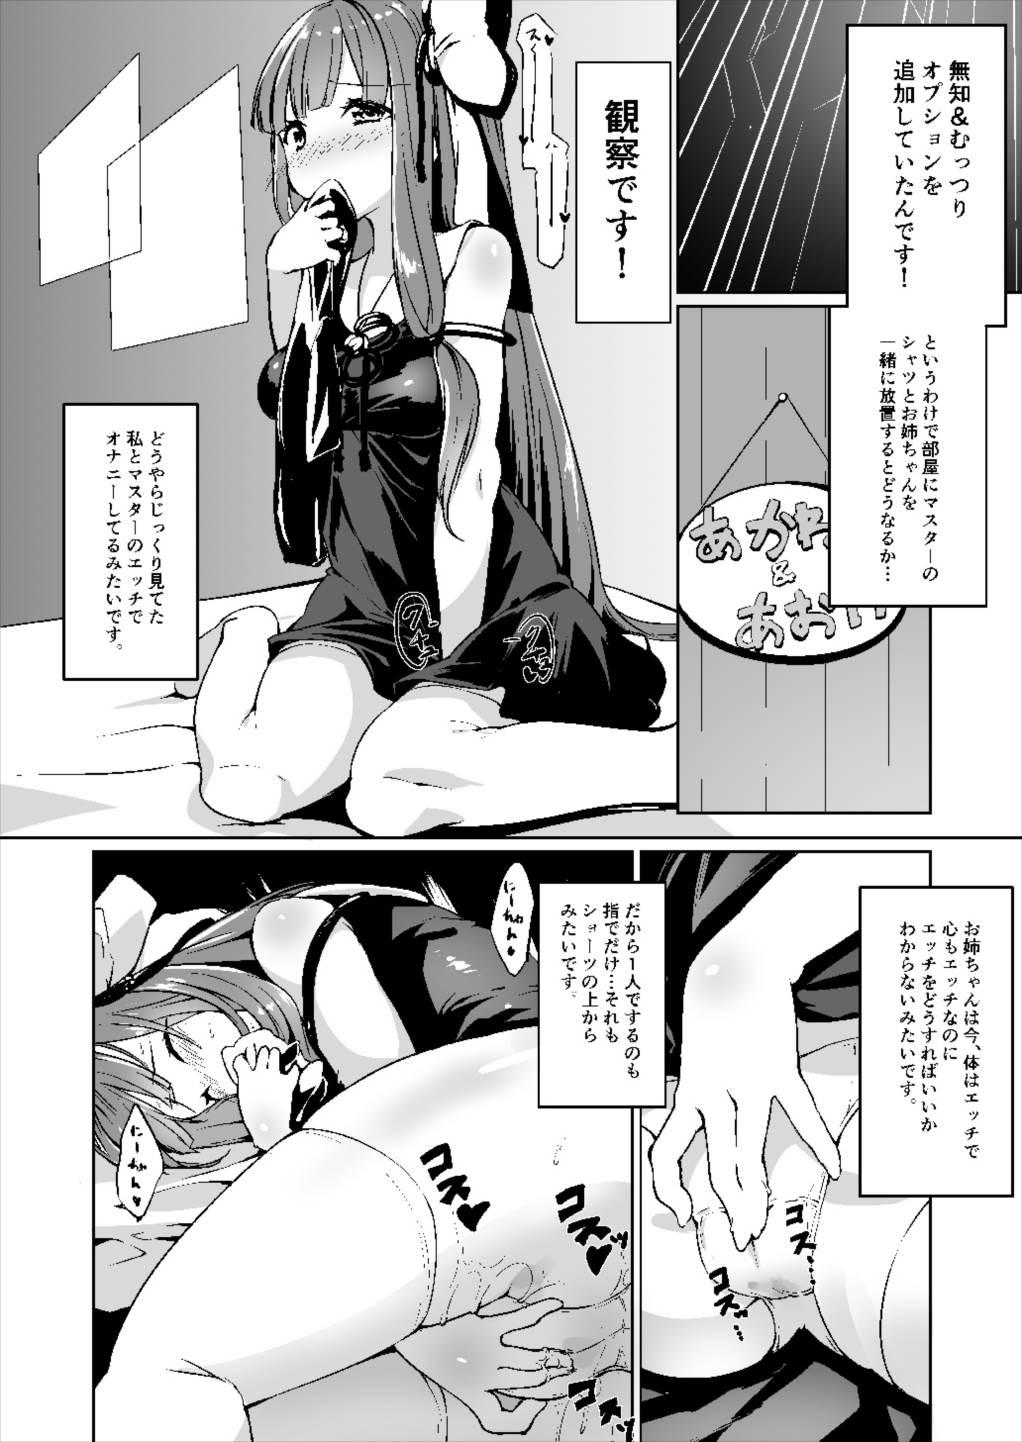 Gay Emo コトノハラバーズ VOL.06 【お姉ちゃん観察日記】 - Vocaloid Voiceroid Cream - Page 8